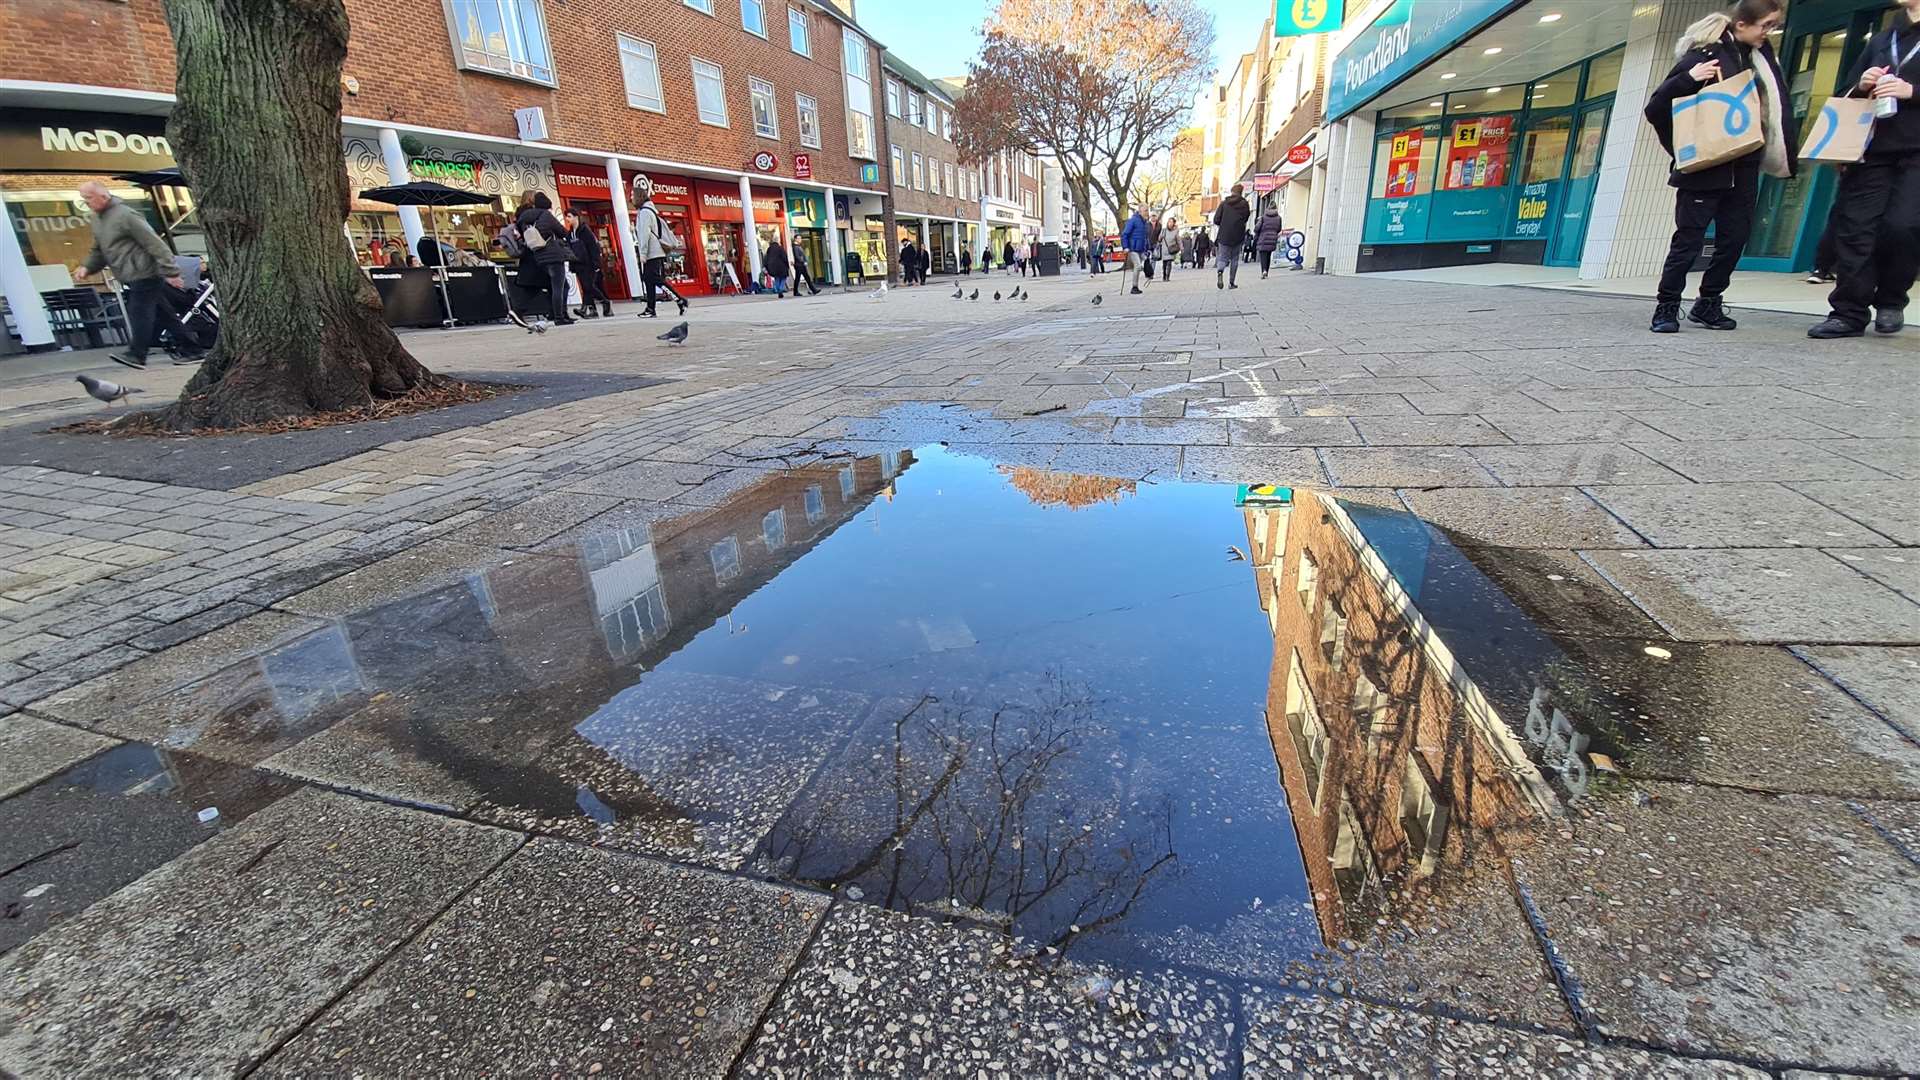 The current road surface in St George's Street is uneven, causing deep puddles when it rains